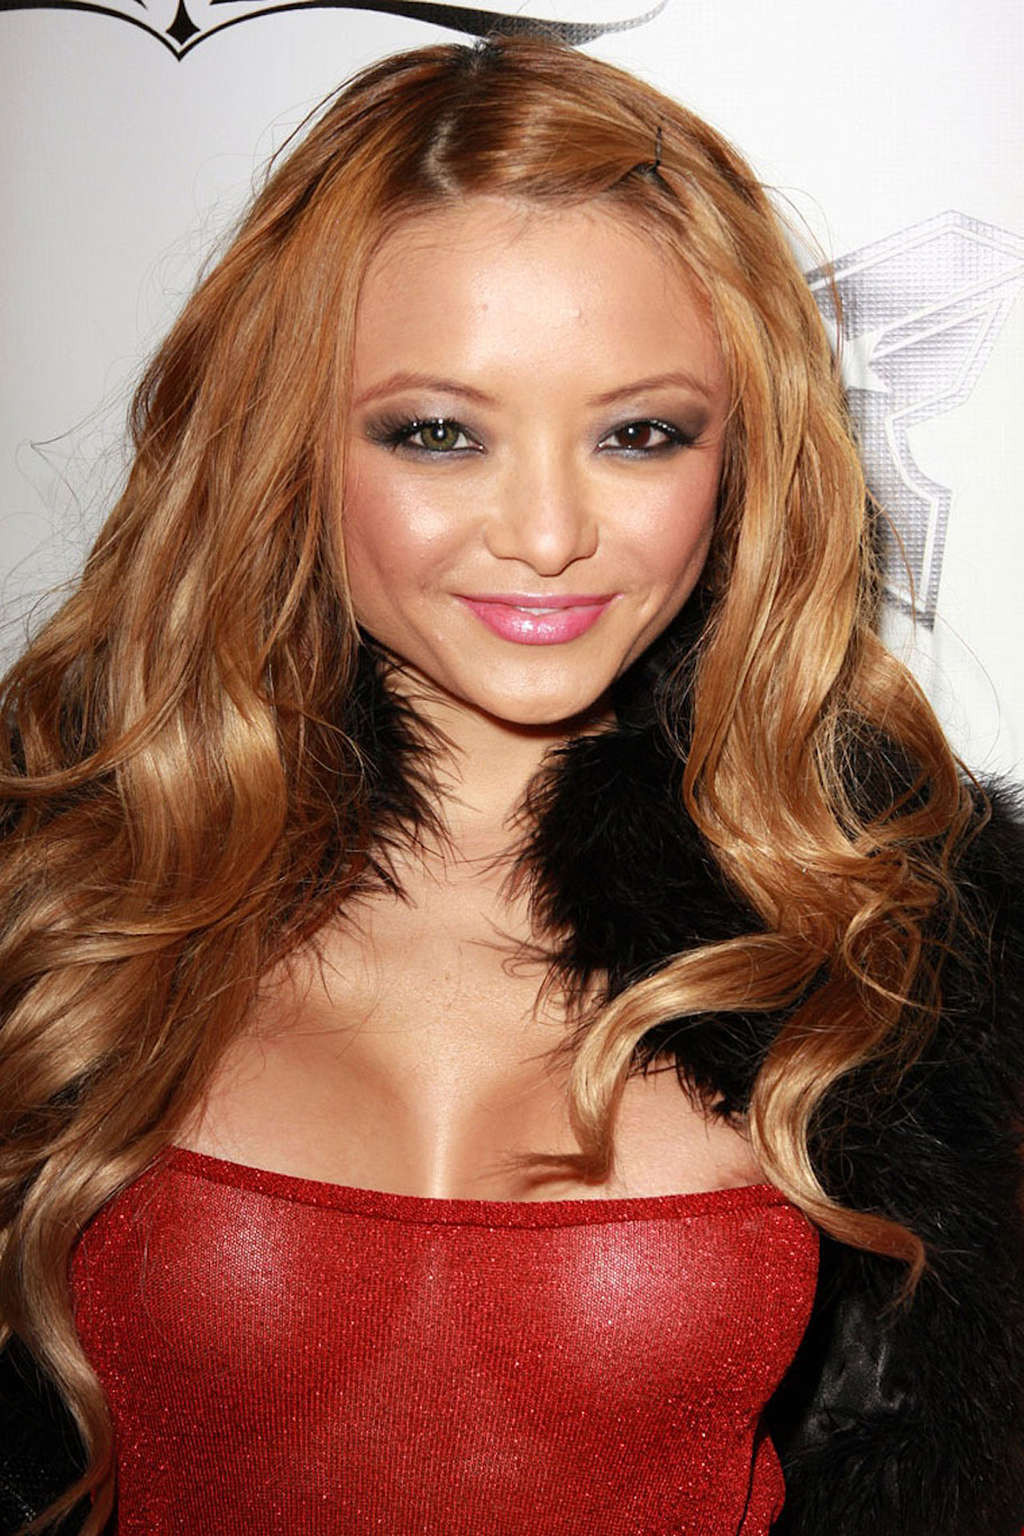 Tila Tequila nipple slip in public paparazzi pictures and exposing her nice big  #75370170